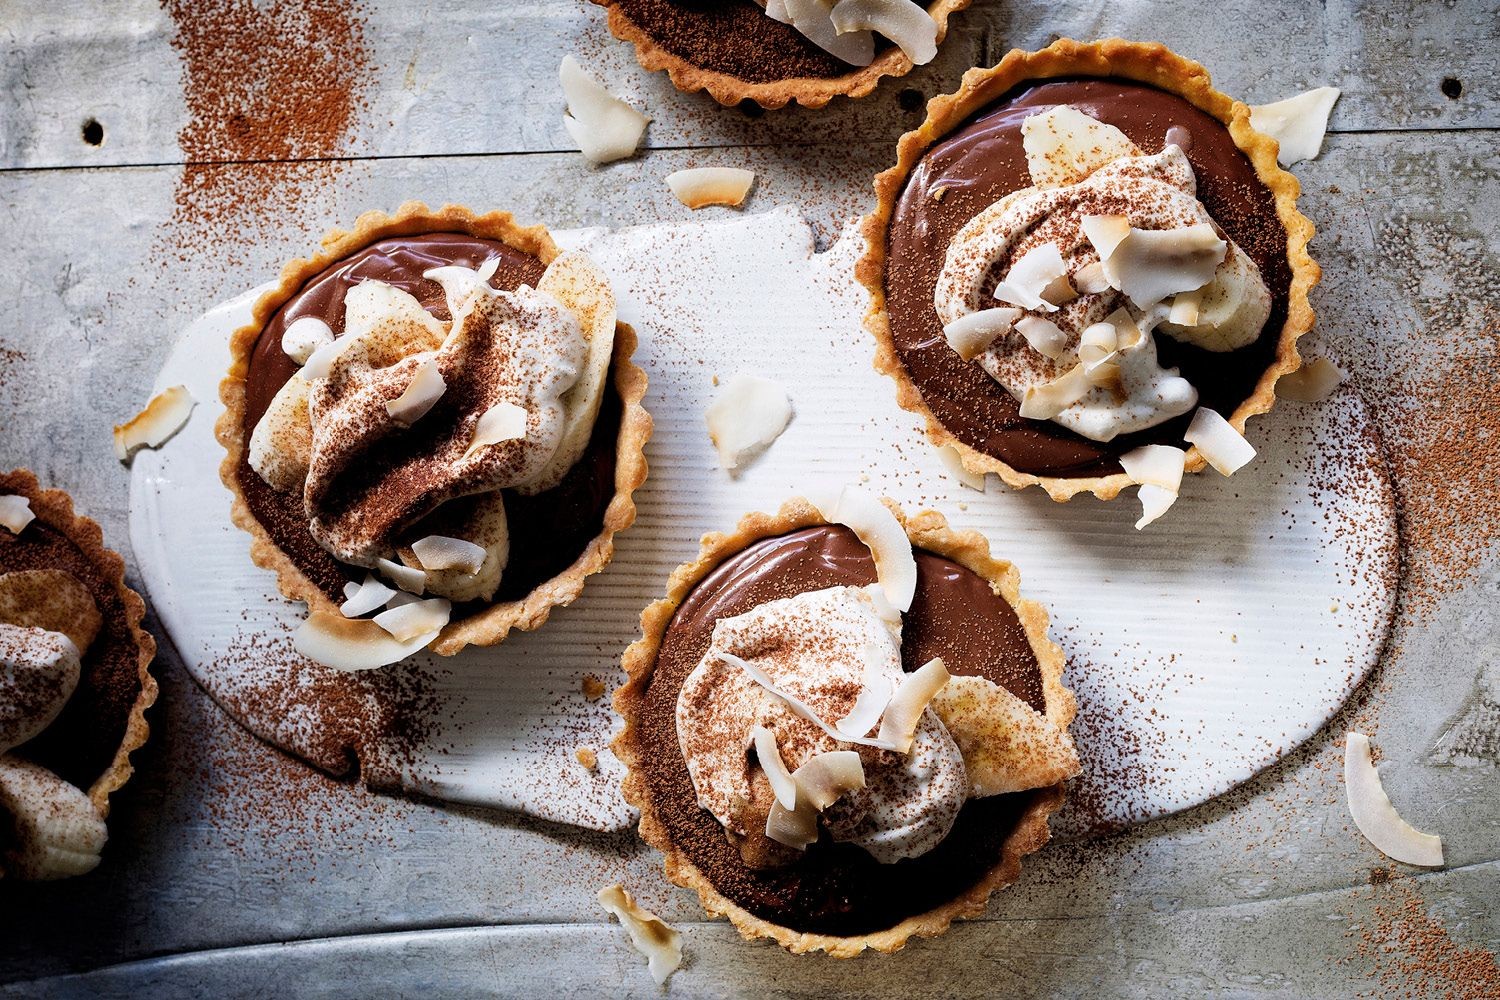 What’s Your IQ, Based Only on Your Dinner Choices? banoffee tart